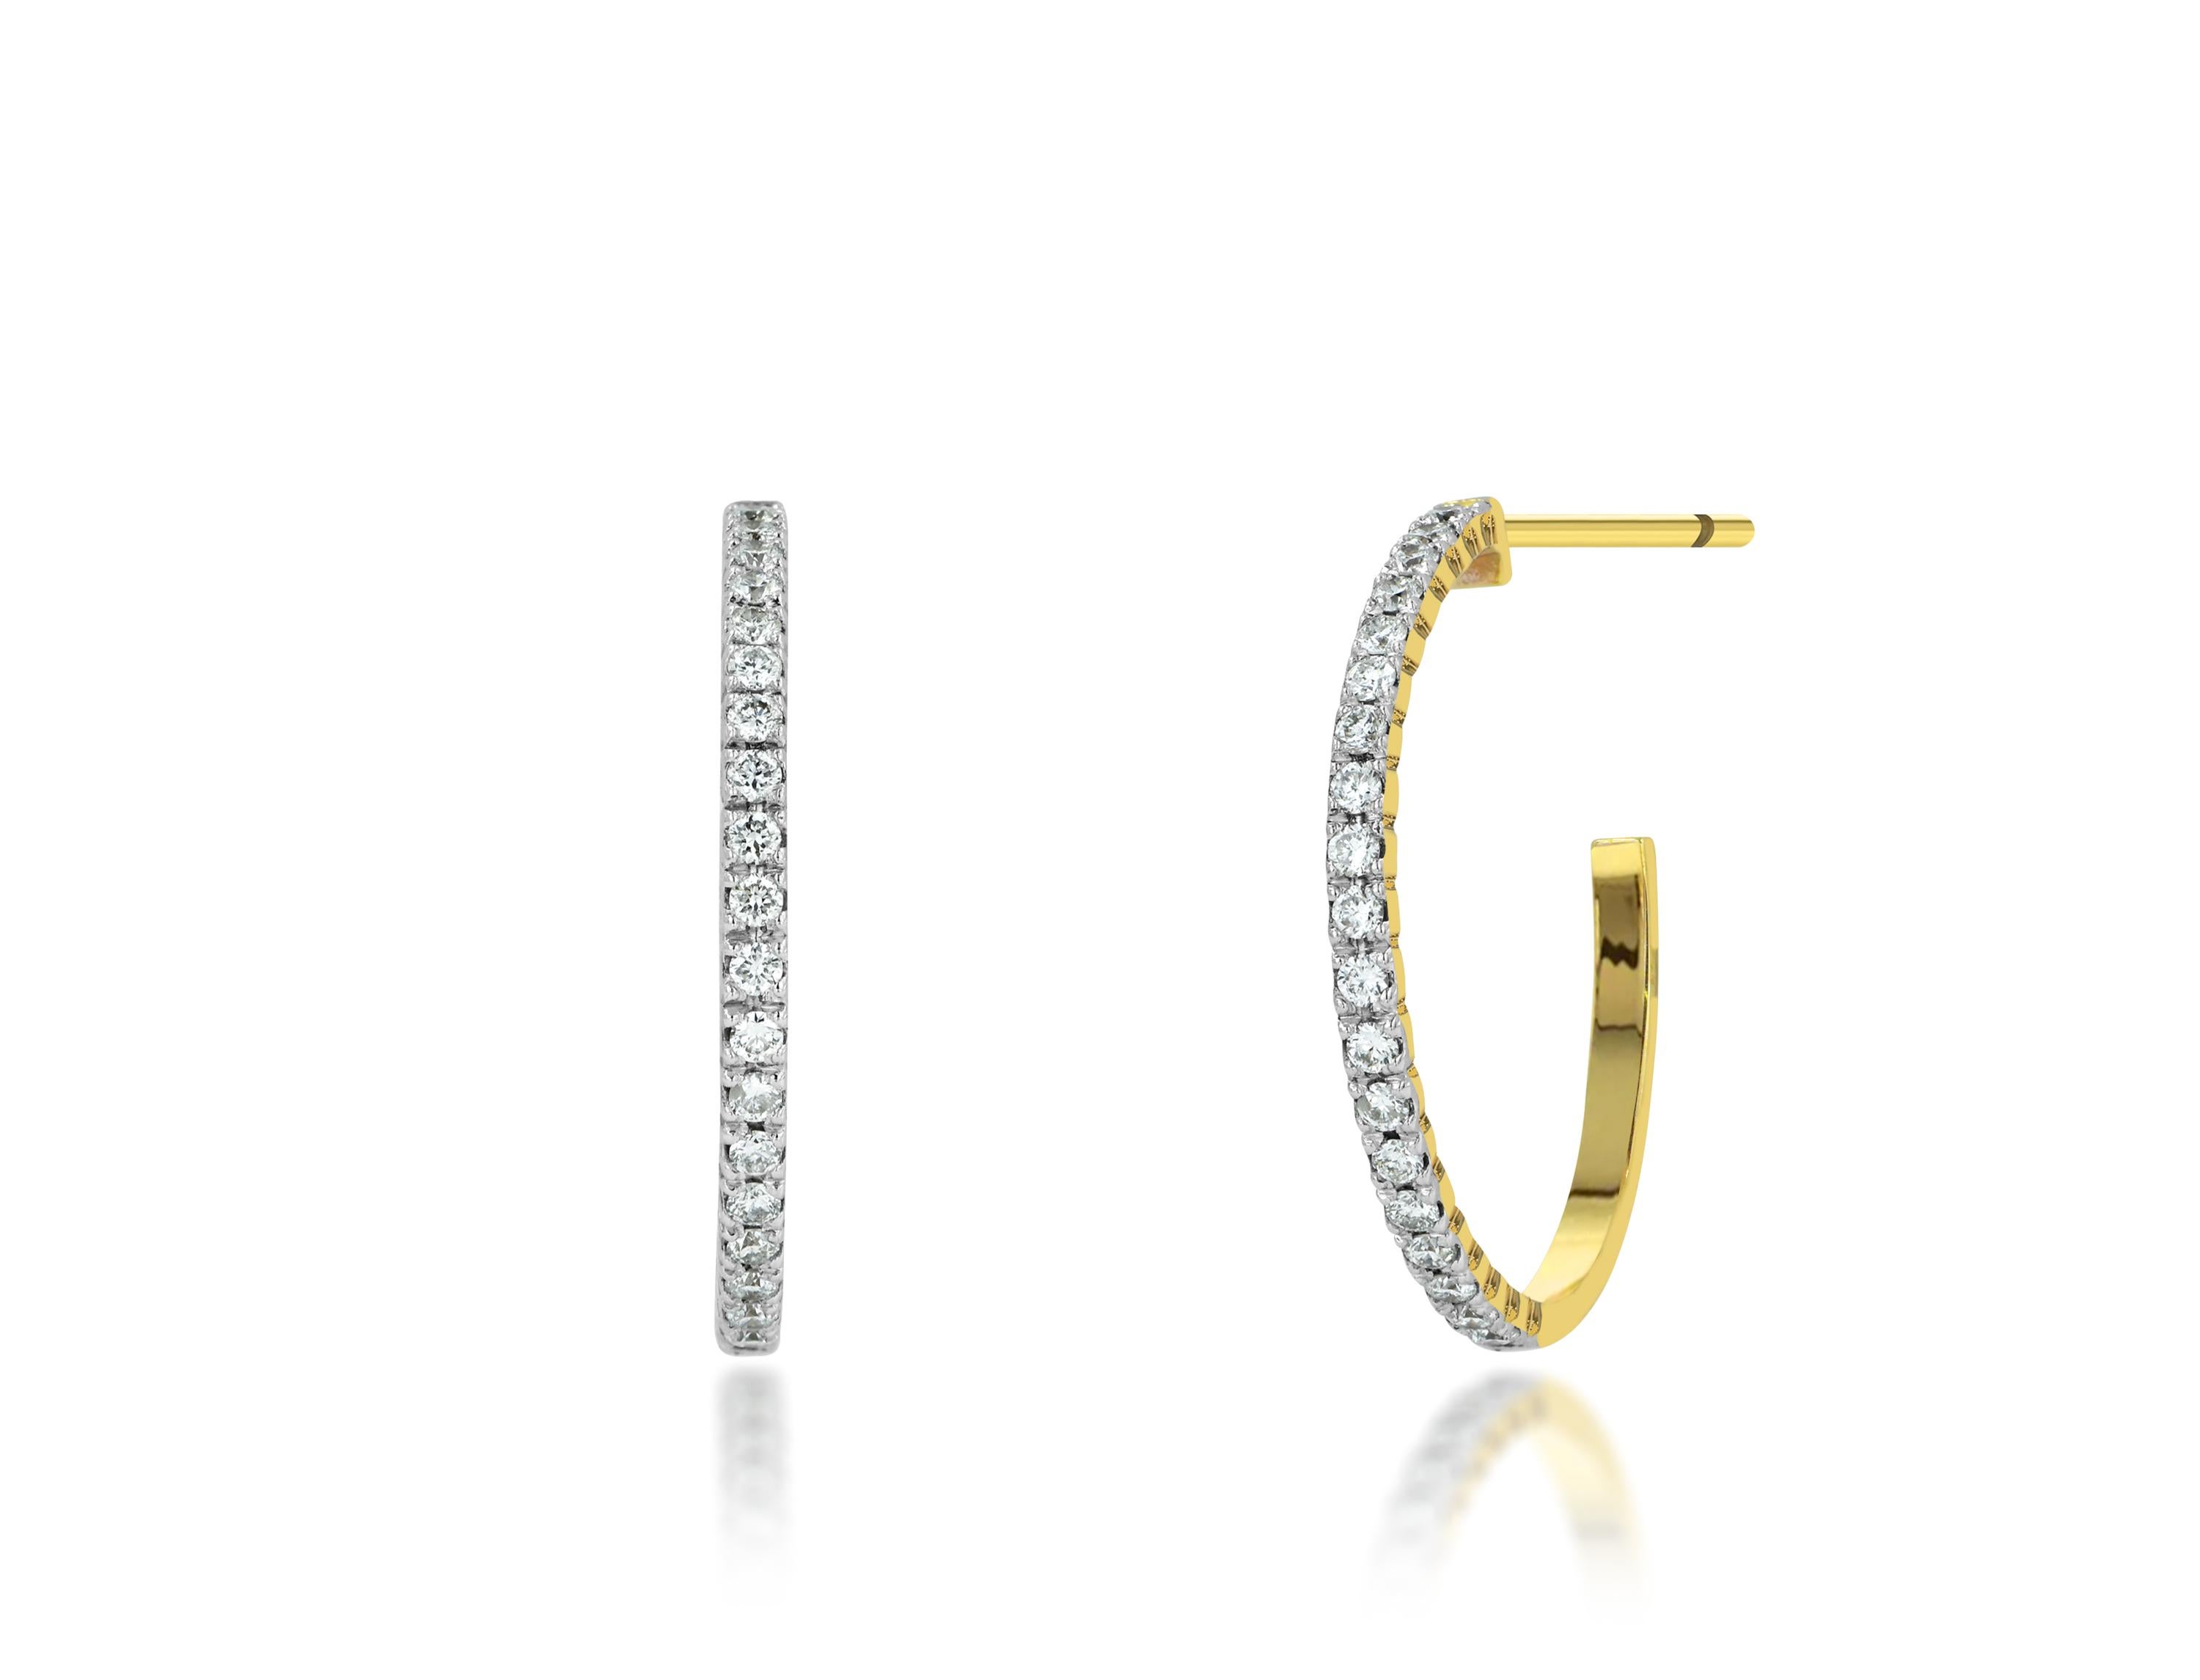 Natural diamond Hoop earrings are made of 18K solid gold available in three colors of gold, Rose Gold / Yellow Gold / White Gold.

Perfect to wear anytime or day to day wearing they will go with everything a must have pair of half hoop. Easy to wear